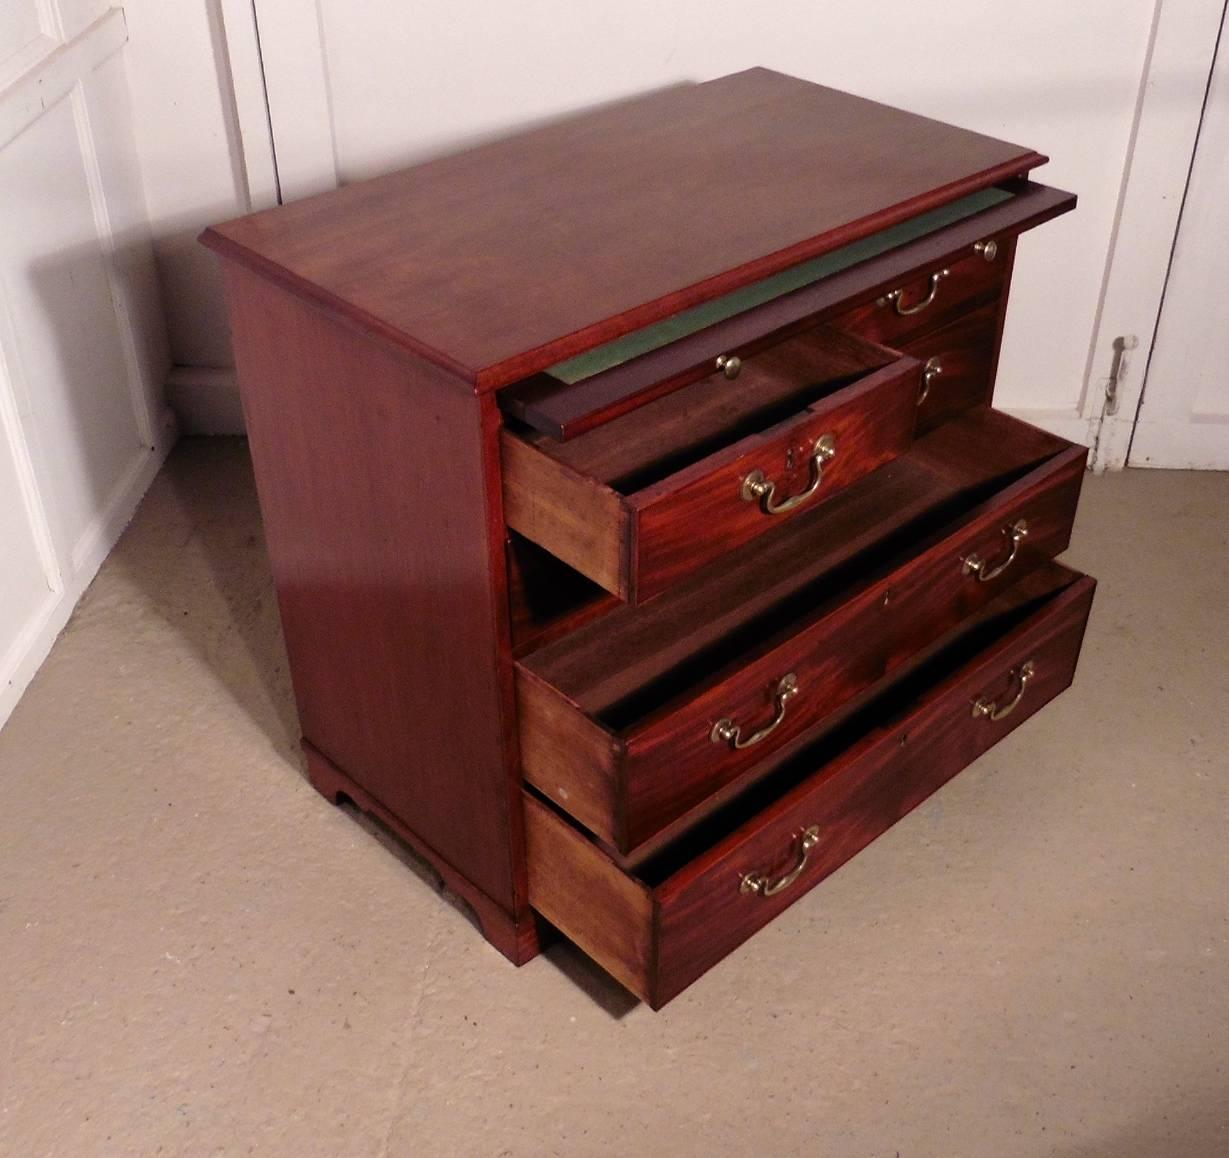 The chest has two short drawers at the top and three graduated long drawers beneath. 
The drawers run very smoothly they have brass swan neck handles, above the drawers we have brushing slide with an inset green base. 
This is a small chest of